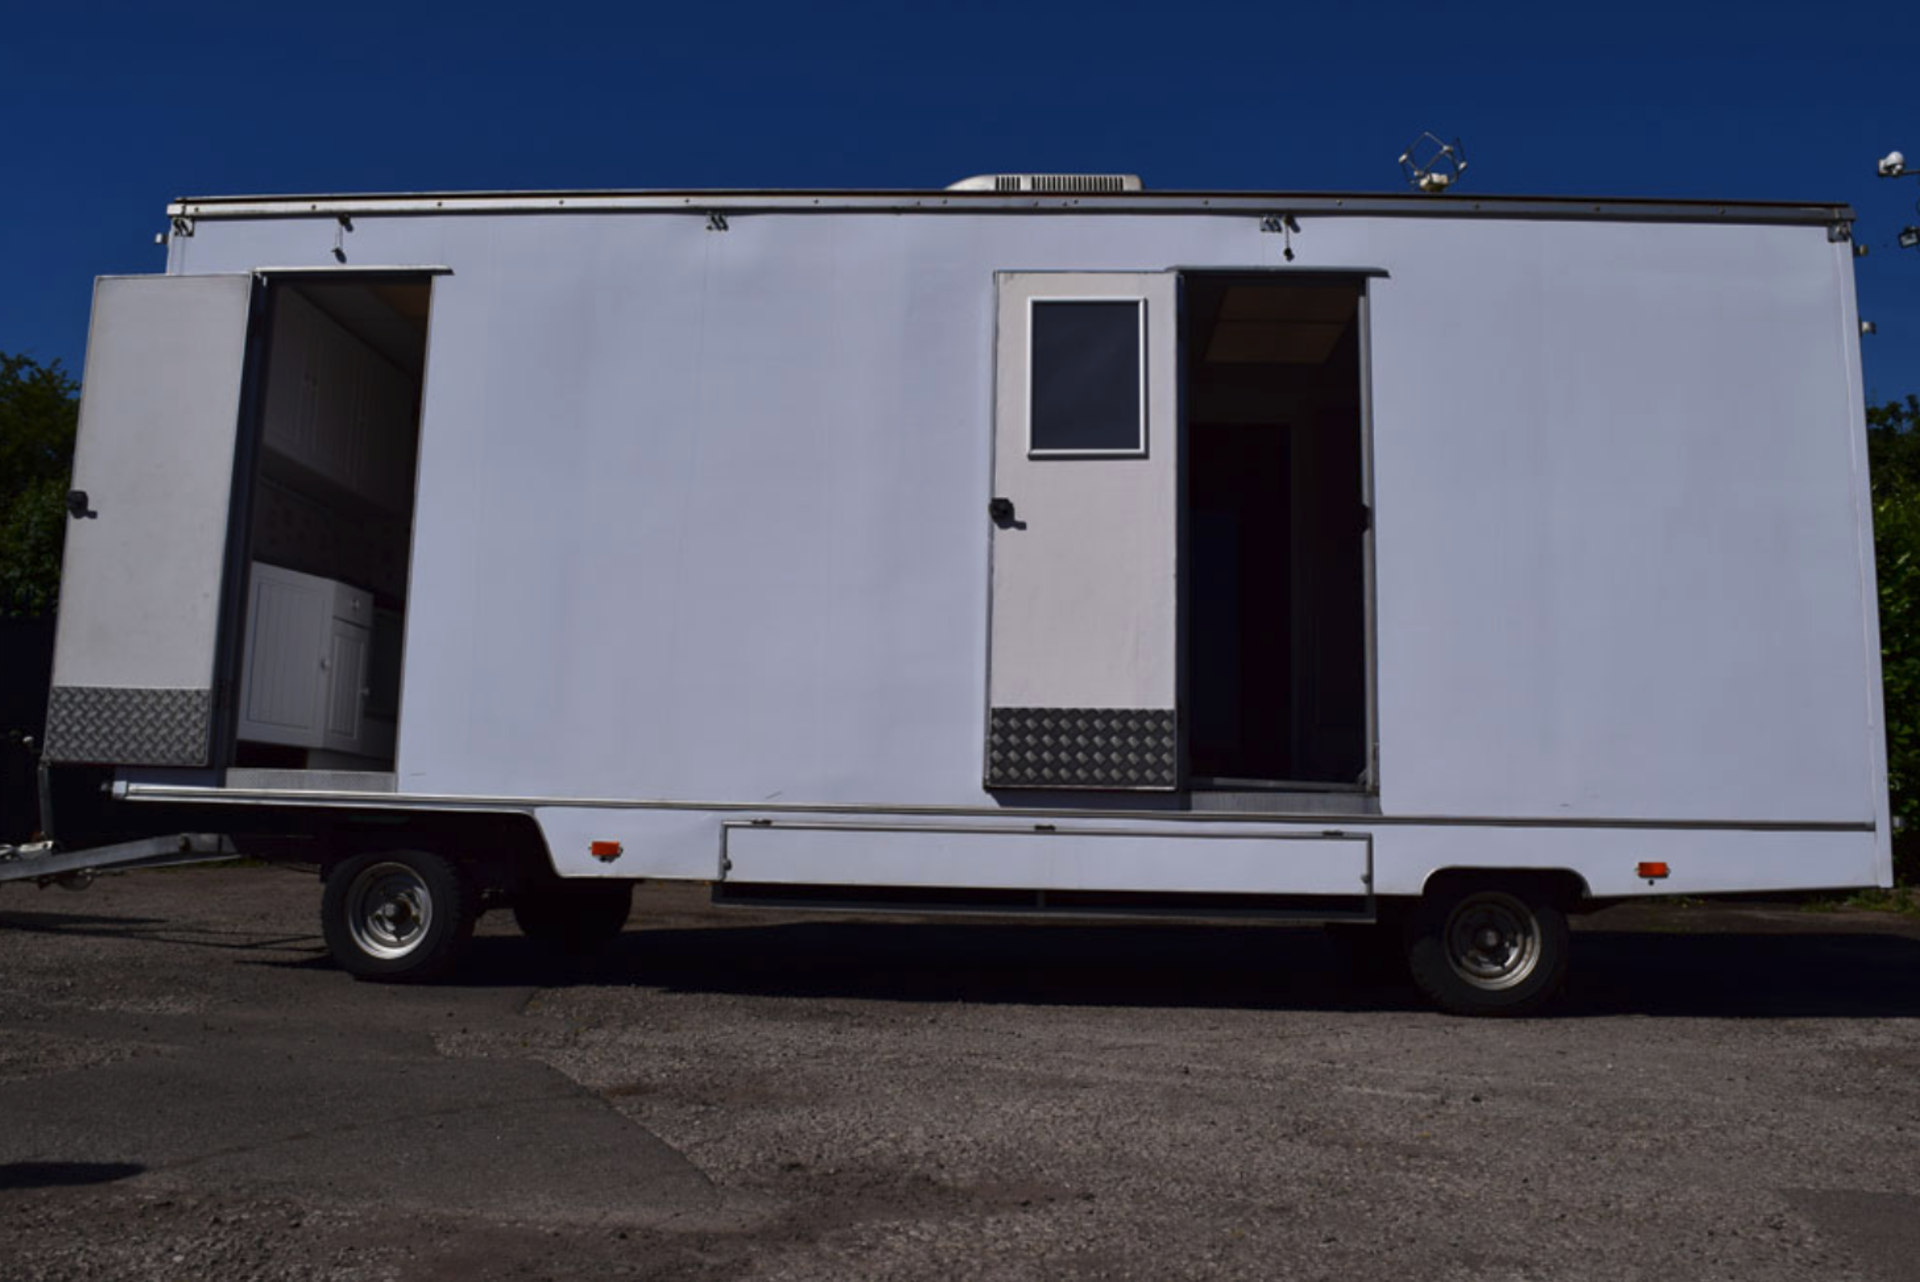 Torton 7 Meter Exhibition Show Hospitality 3500kg Trailer (folded images attached) - Image 13 of 15